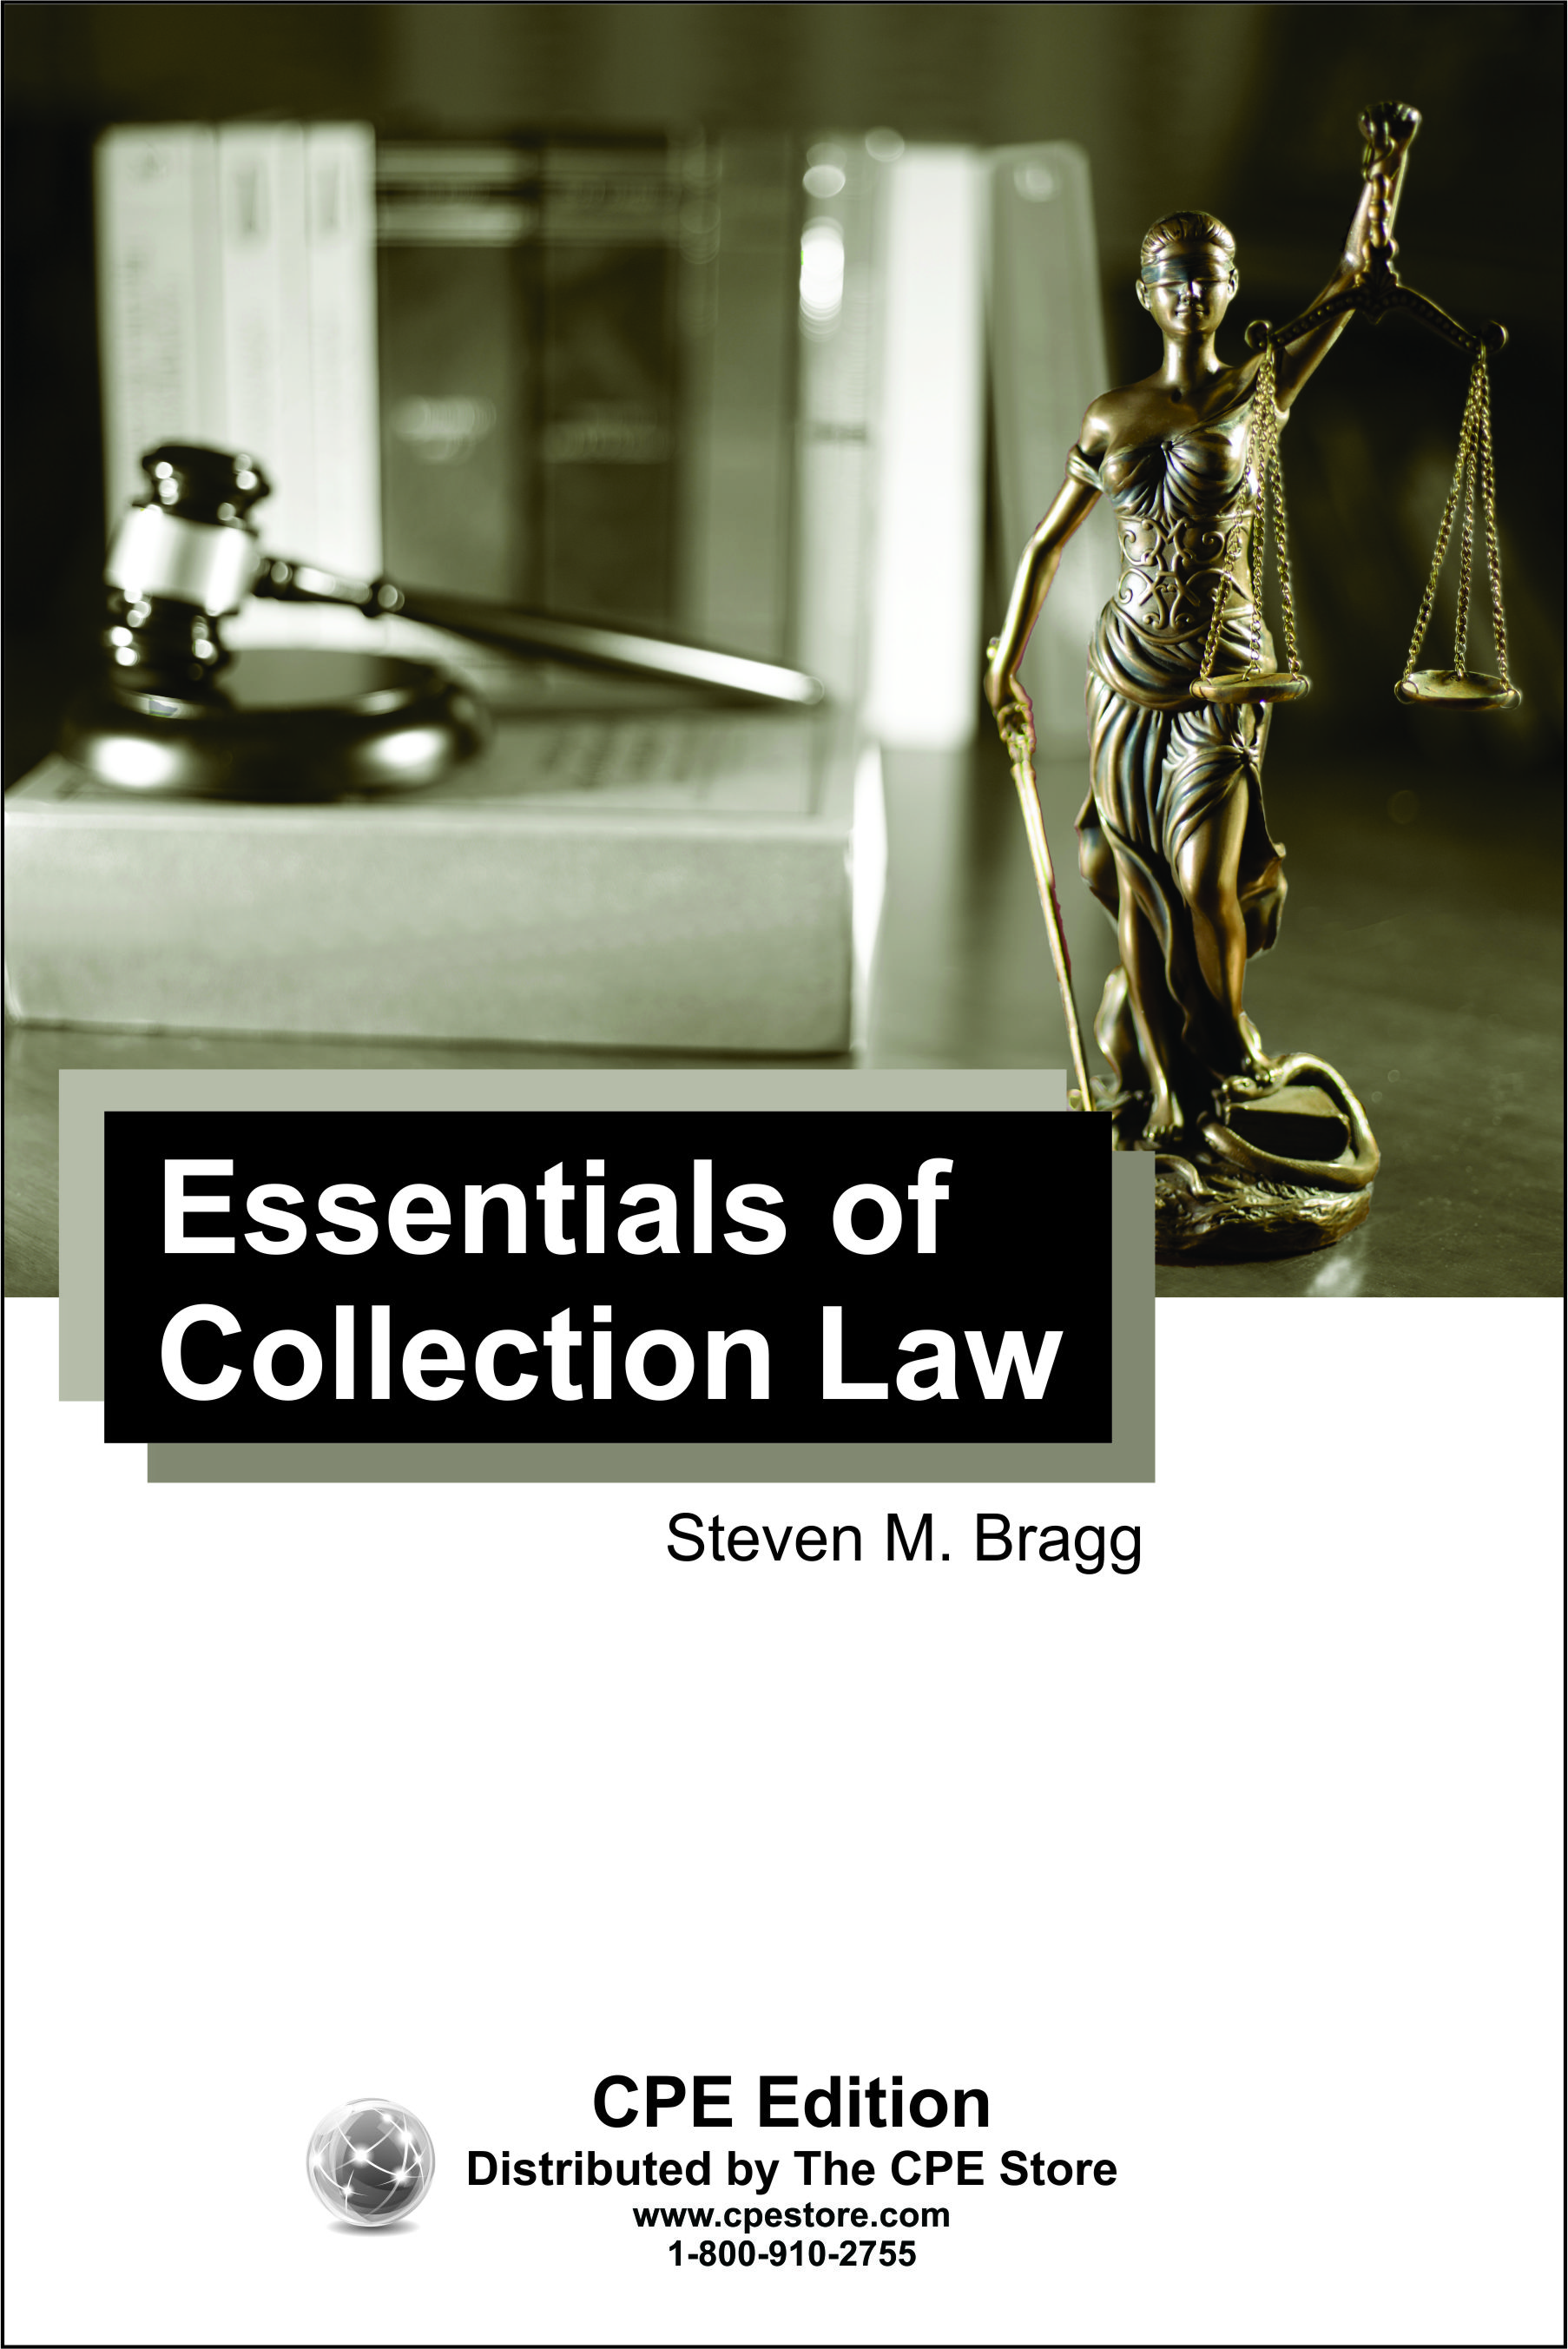 Essentials of Collection Law